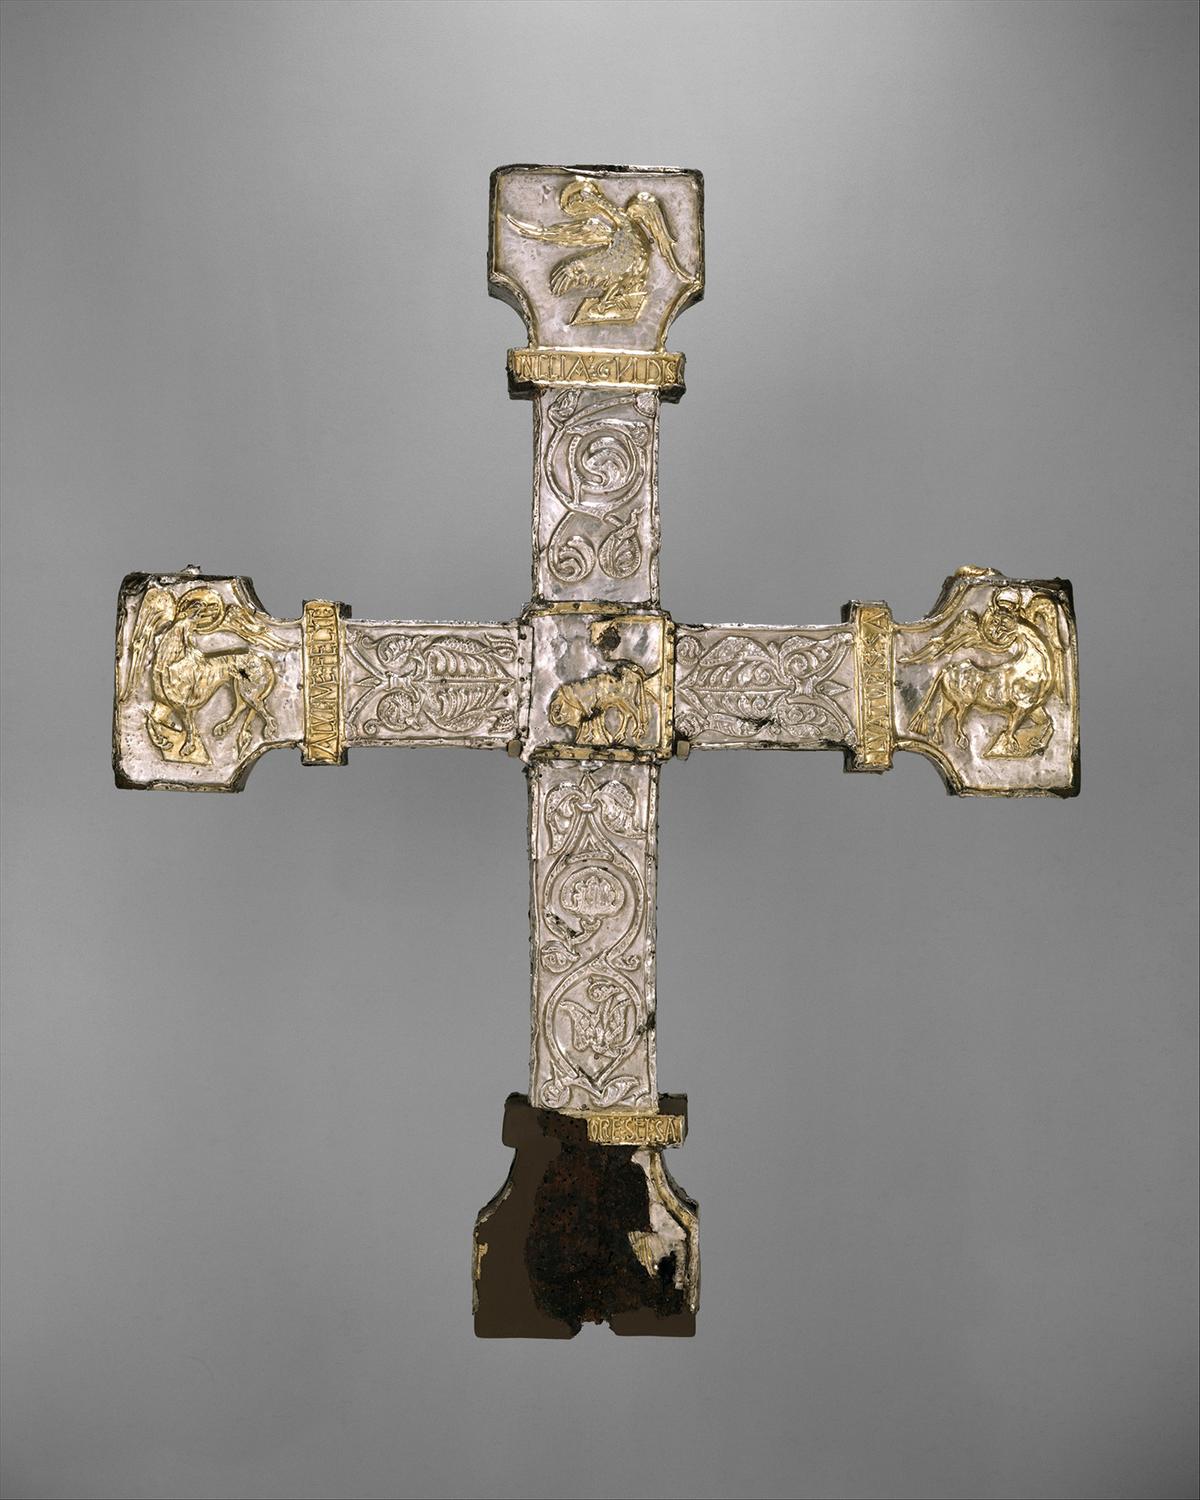 Reverse side of the “Processional Cross," circa 1150–1175. Silver, partially gilt on wood core, carved gems, and jewels. The Metropolitan Museum of Art, New York City. (Public Domain)